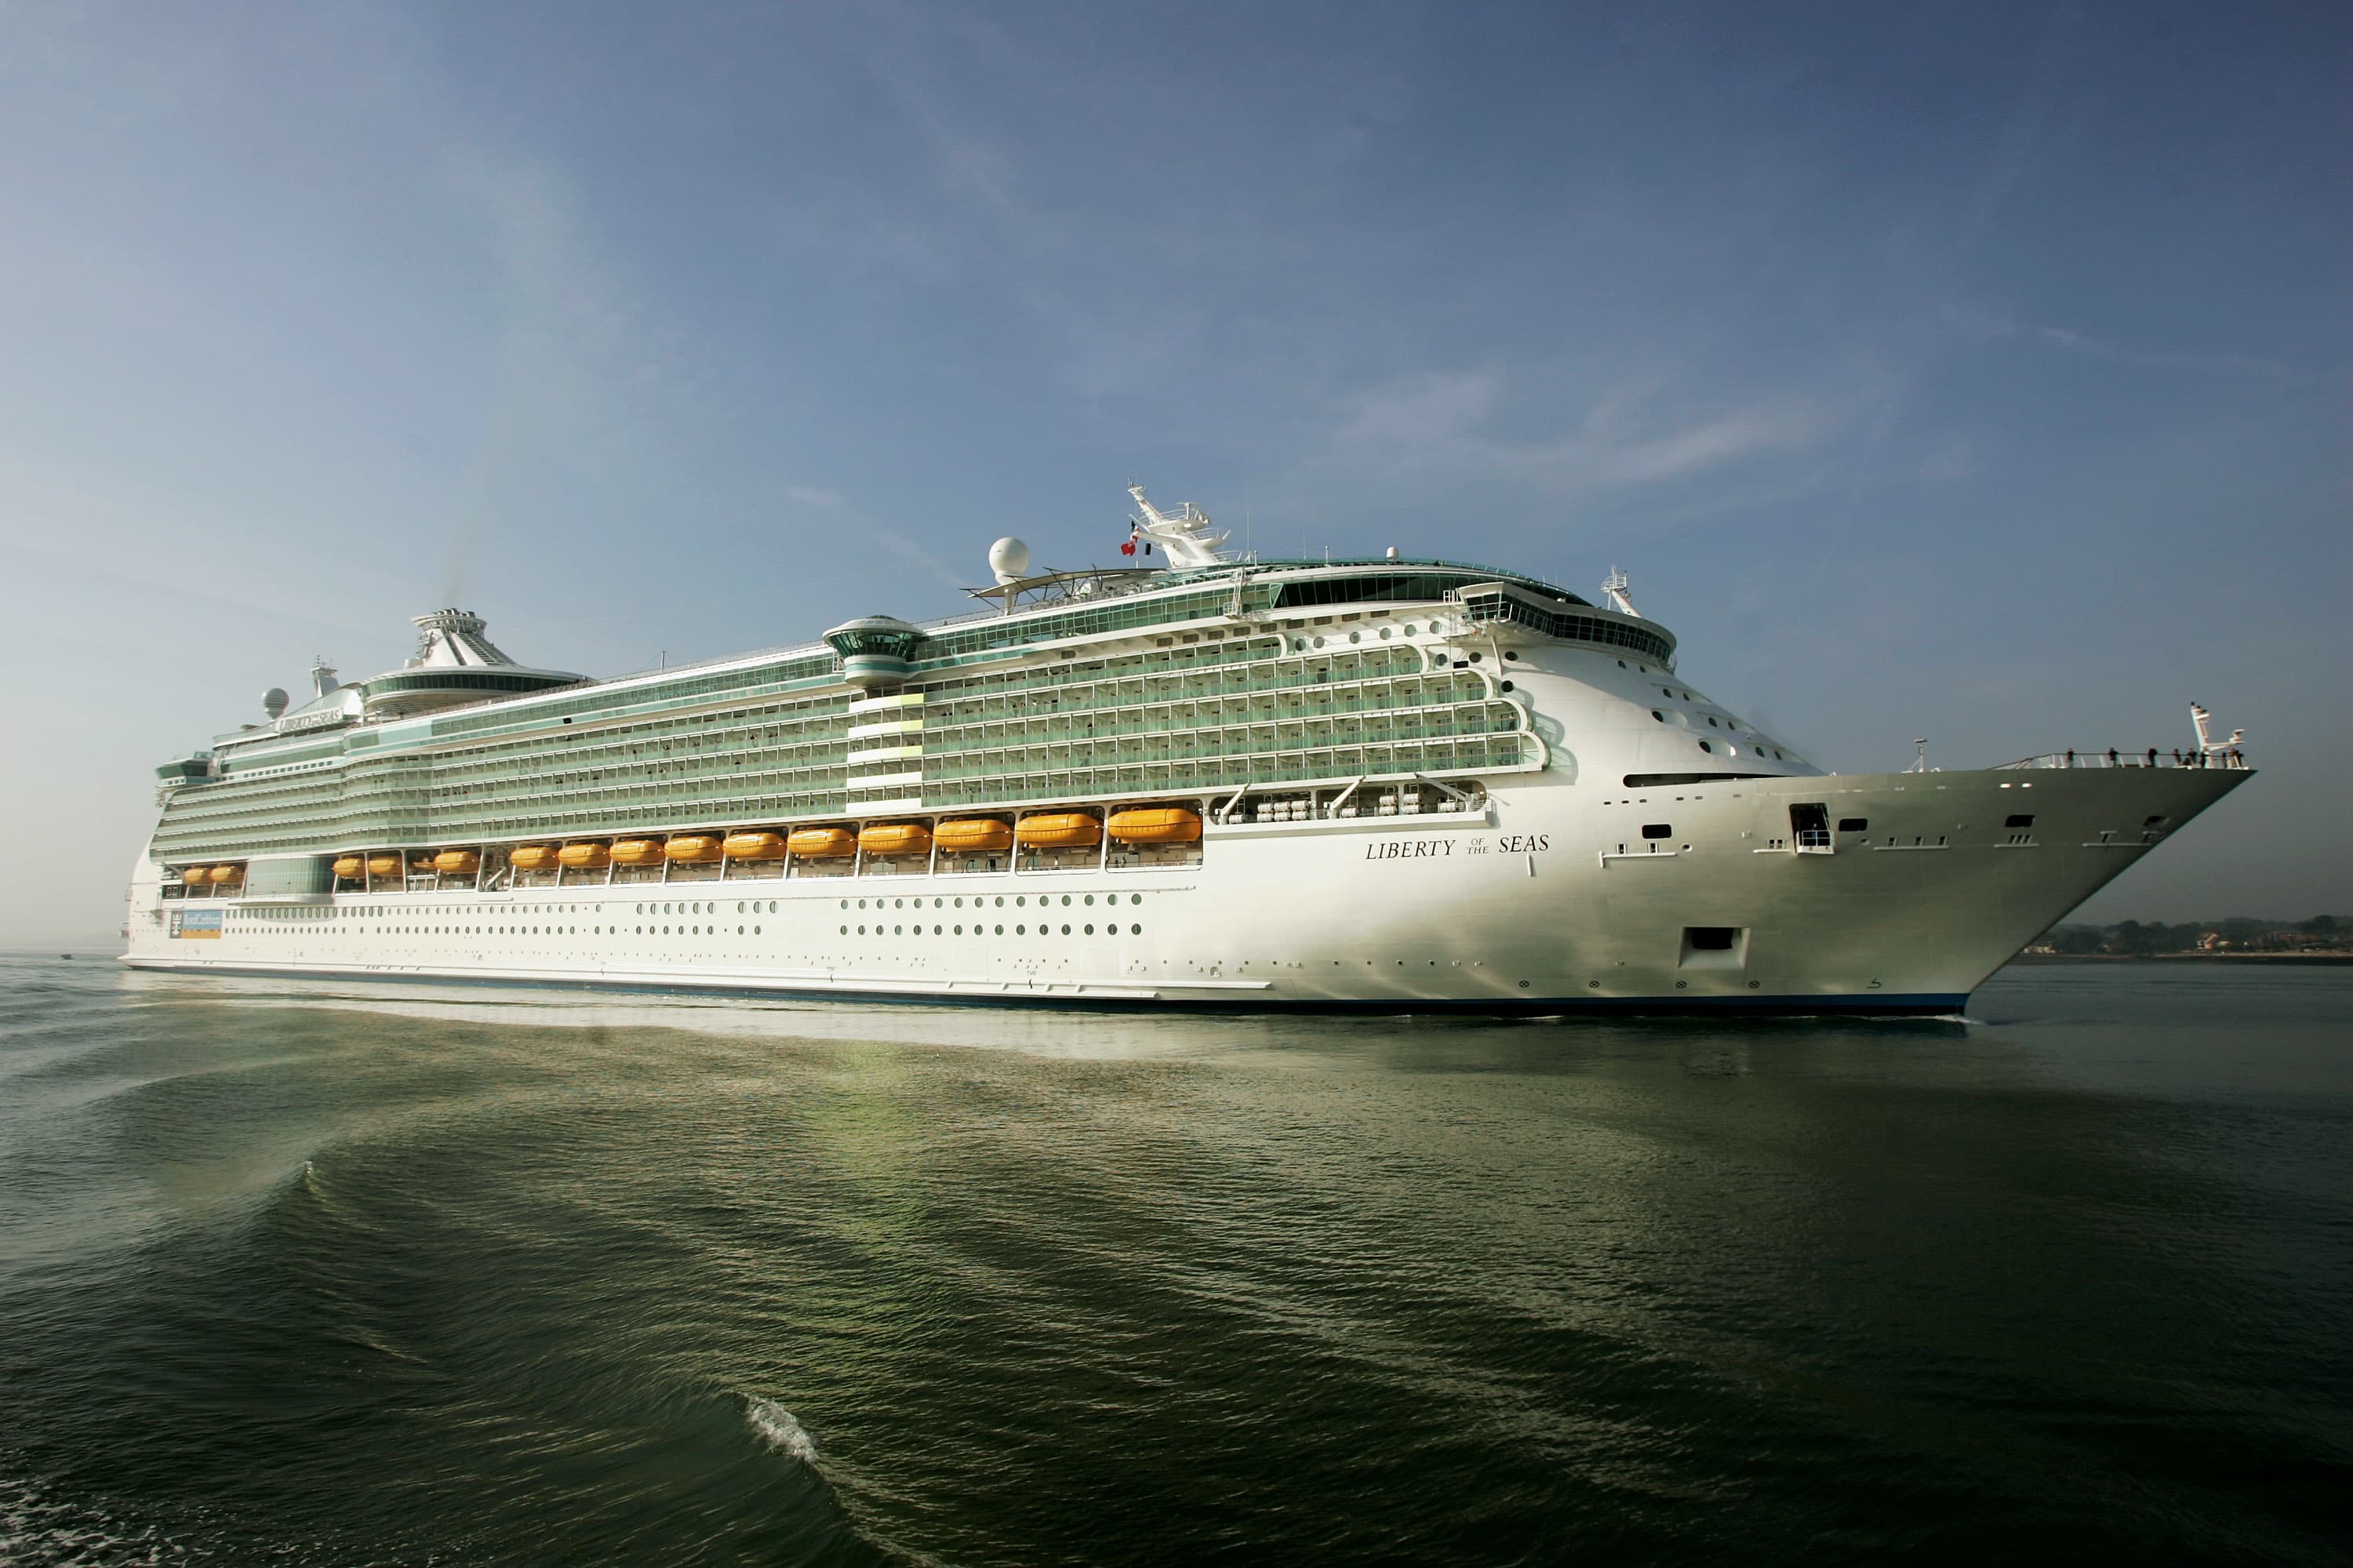 Cruise lines ramp up US sailings, even as delta threatens fall bookings